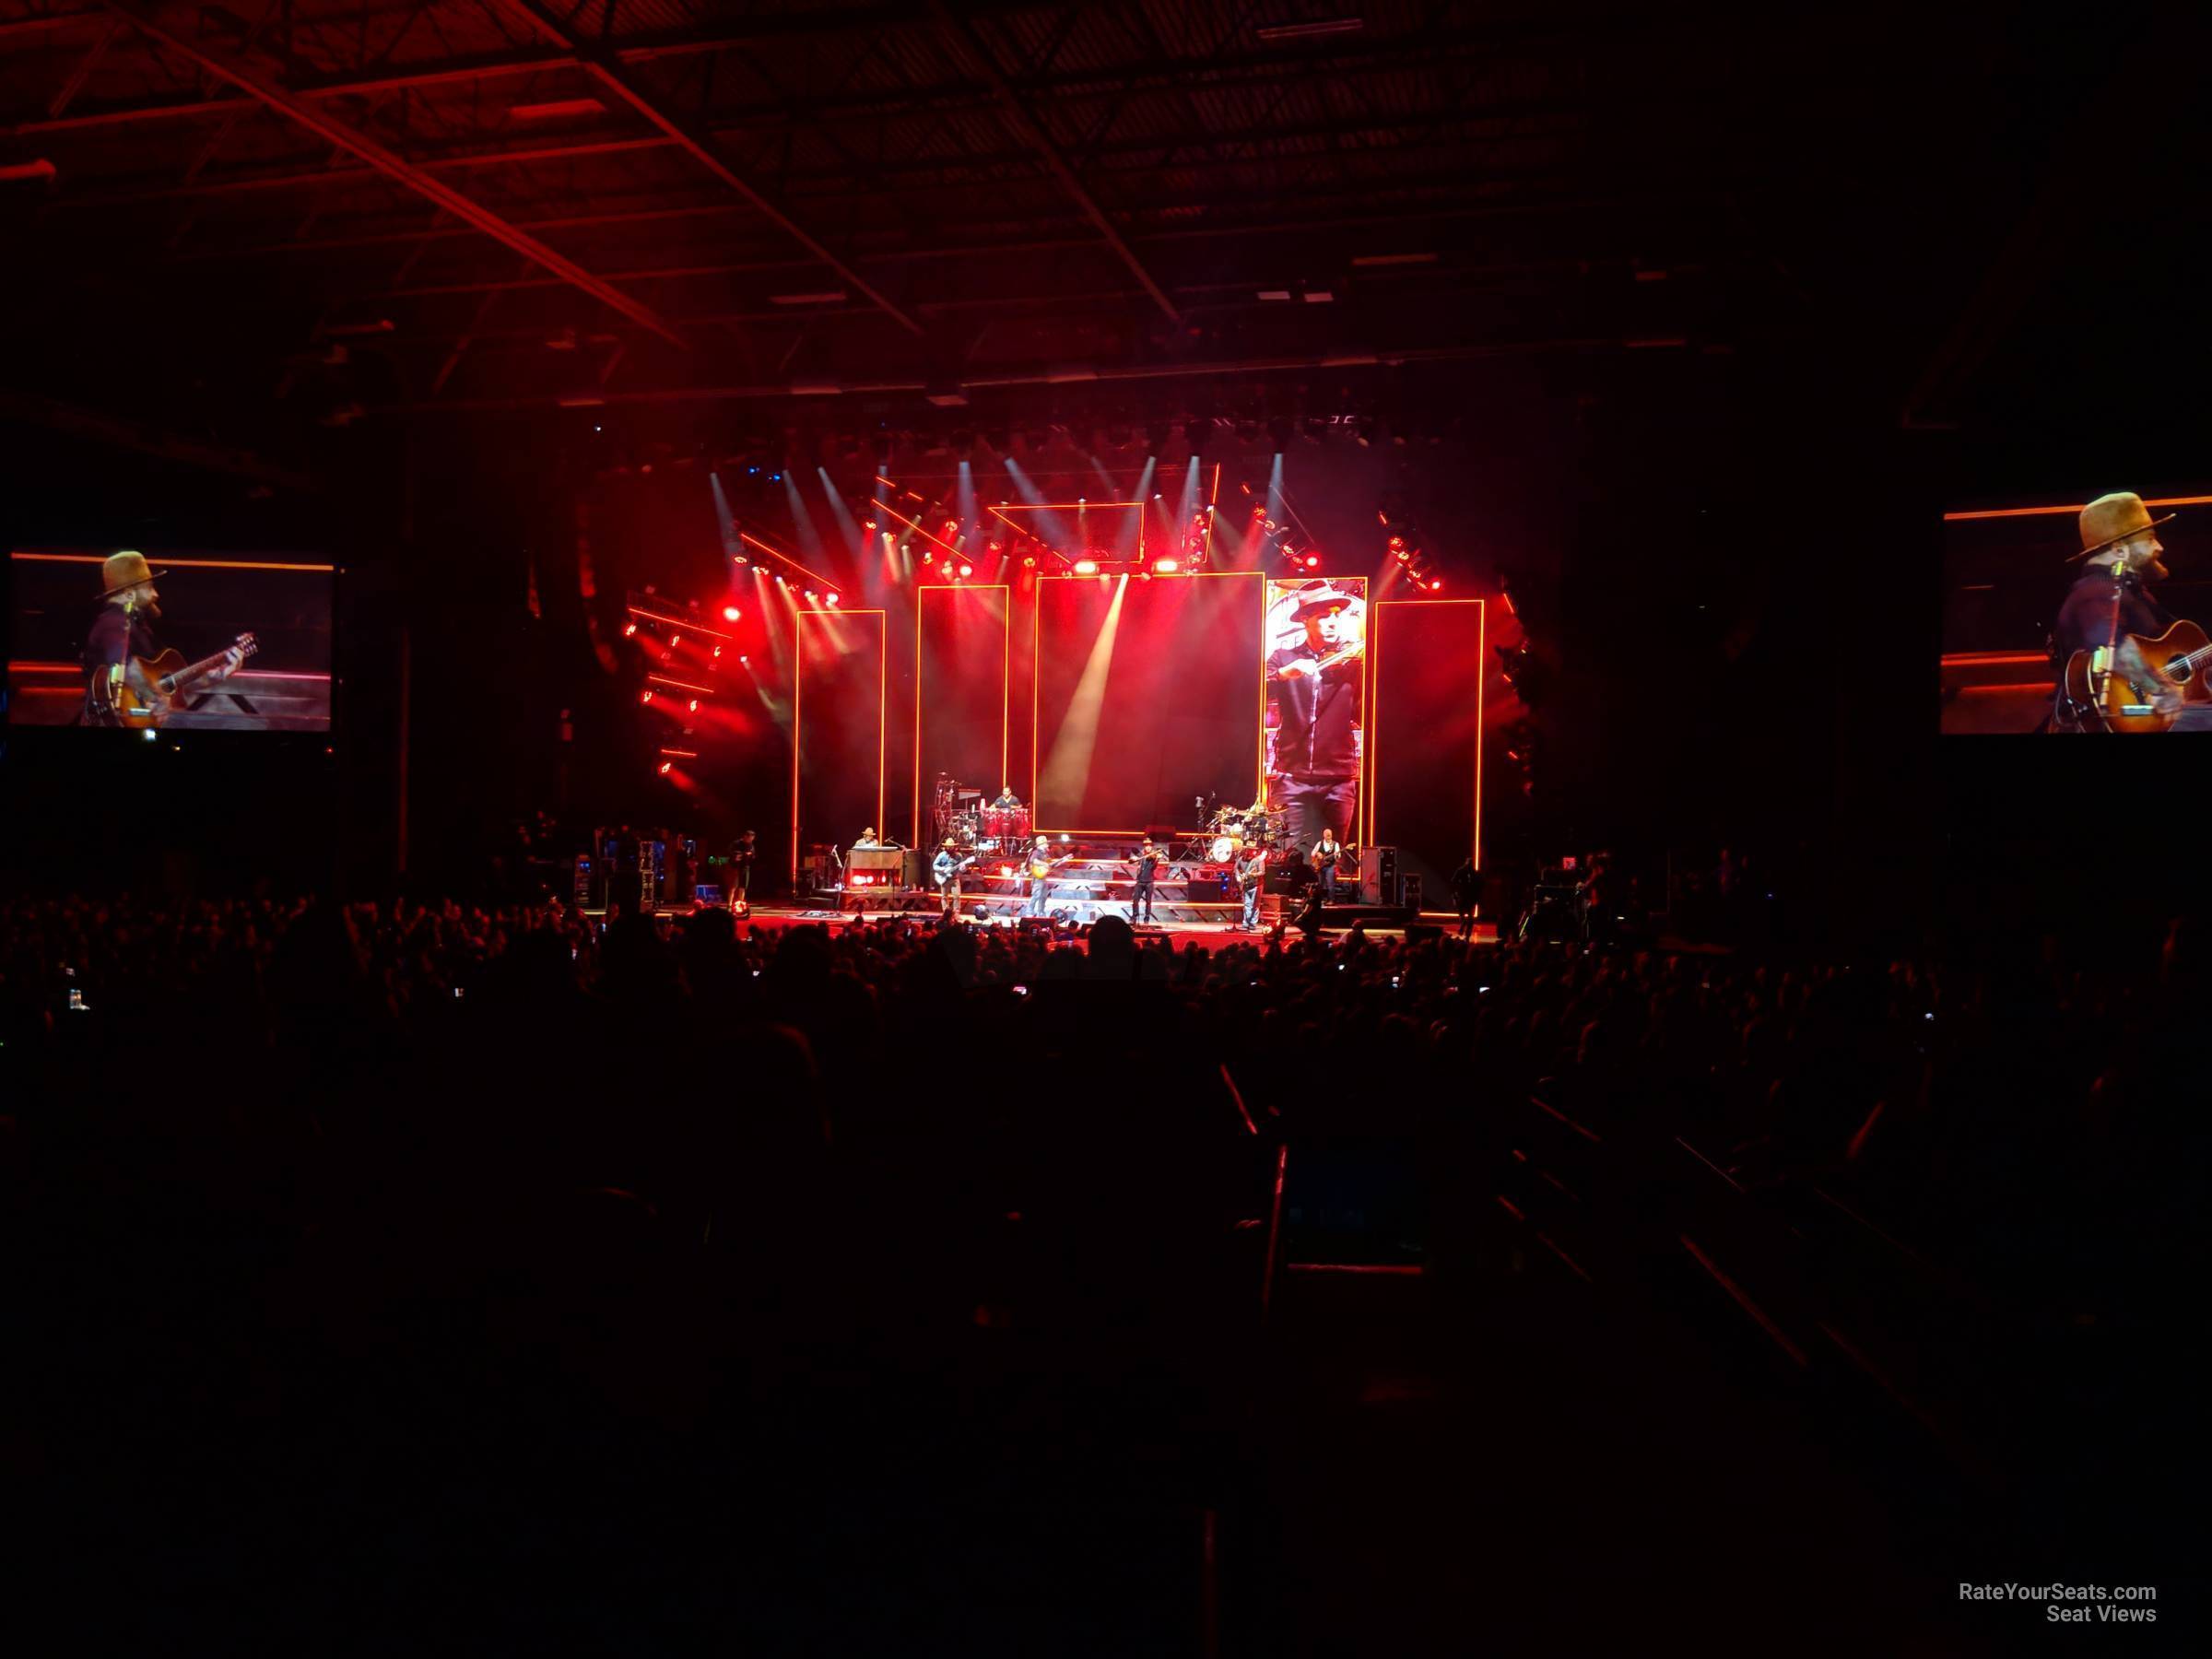 head-on concert view at Hollywood Casino Amphitheatre St. Louis